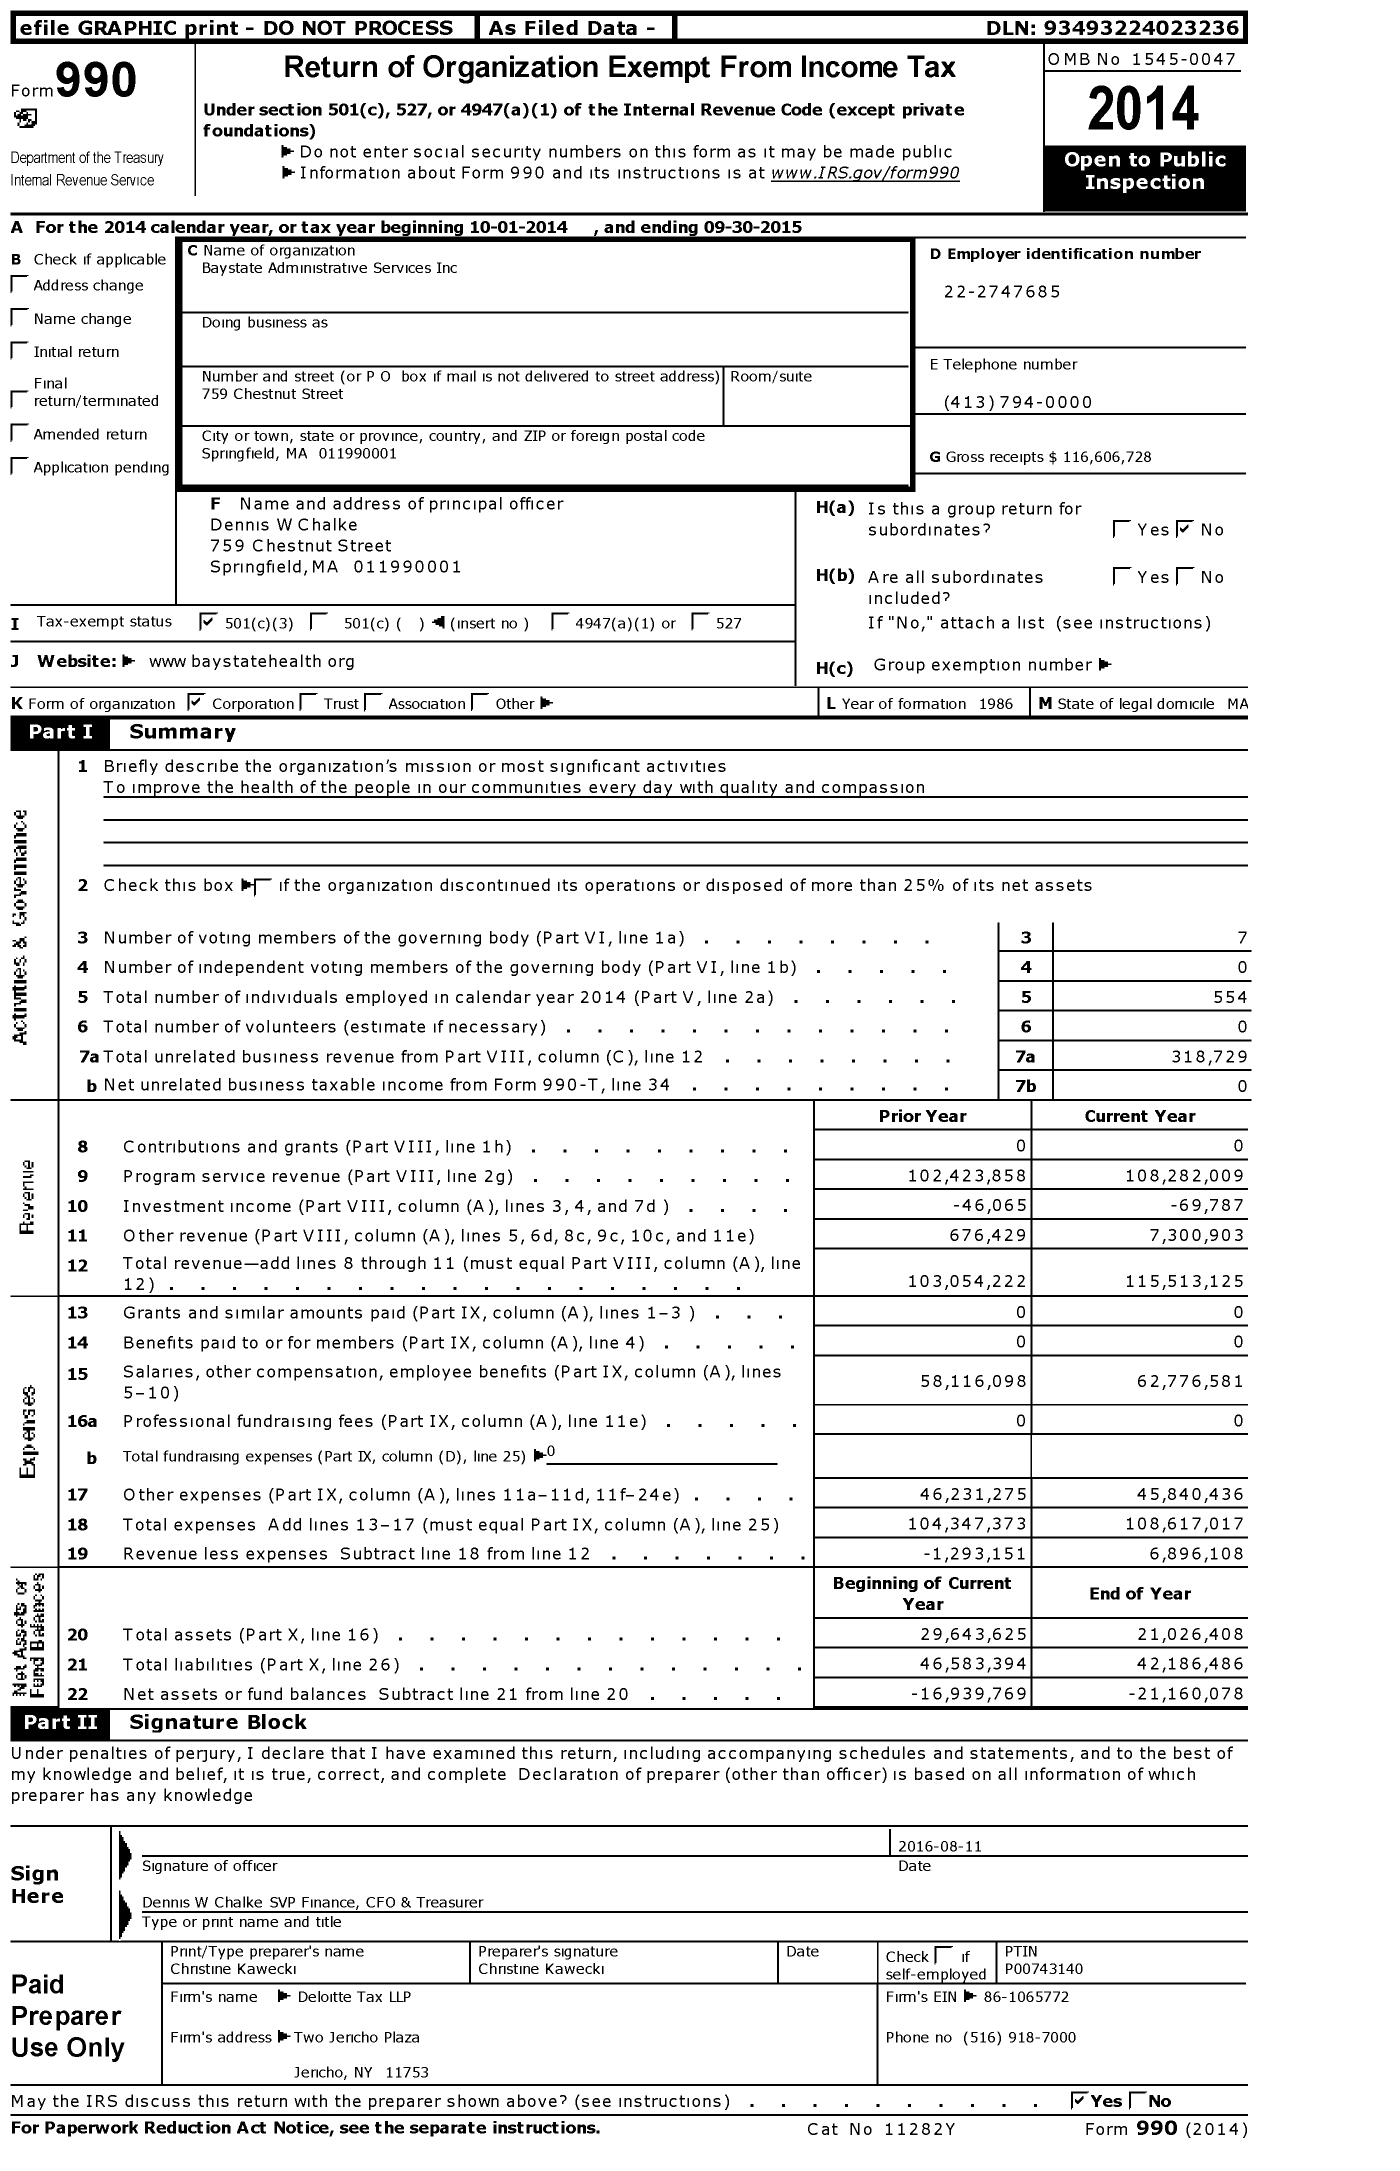 Image of first page of 2014 Form 990 for Baystate Administrative Services